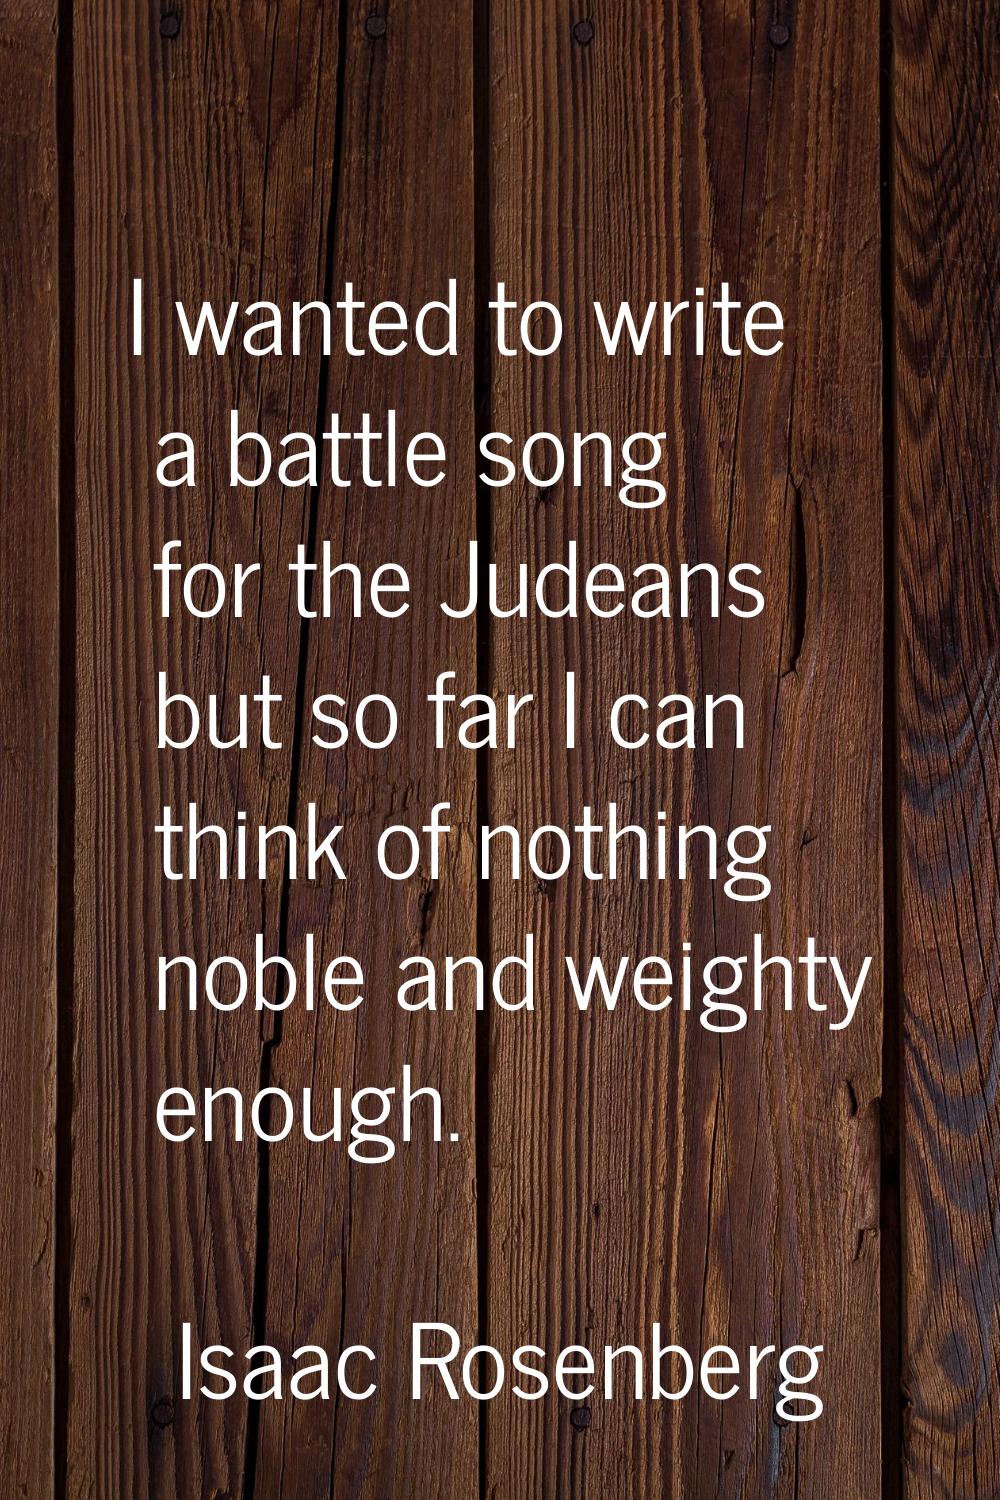 I wanted to write a battle song for the Judeans but so far I can think of nothing noble and weighty